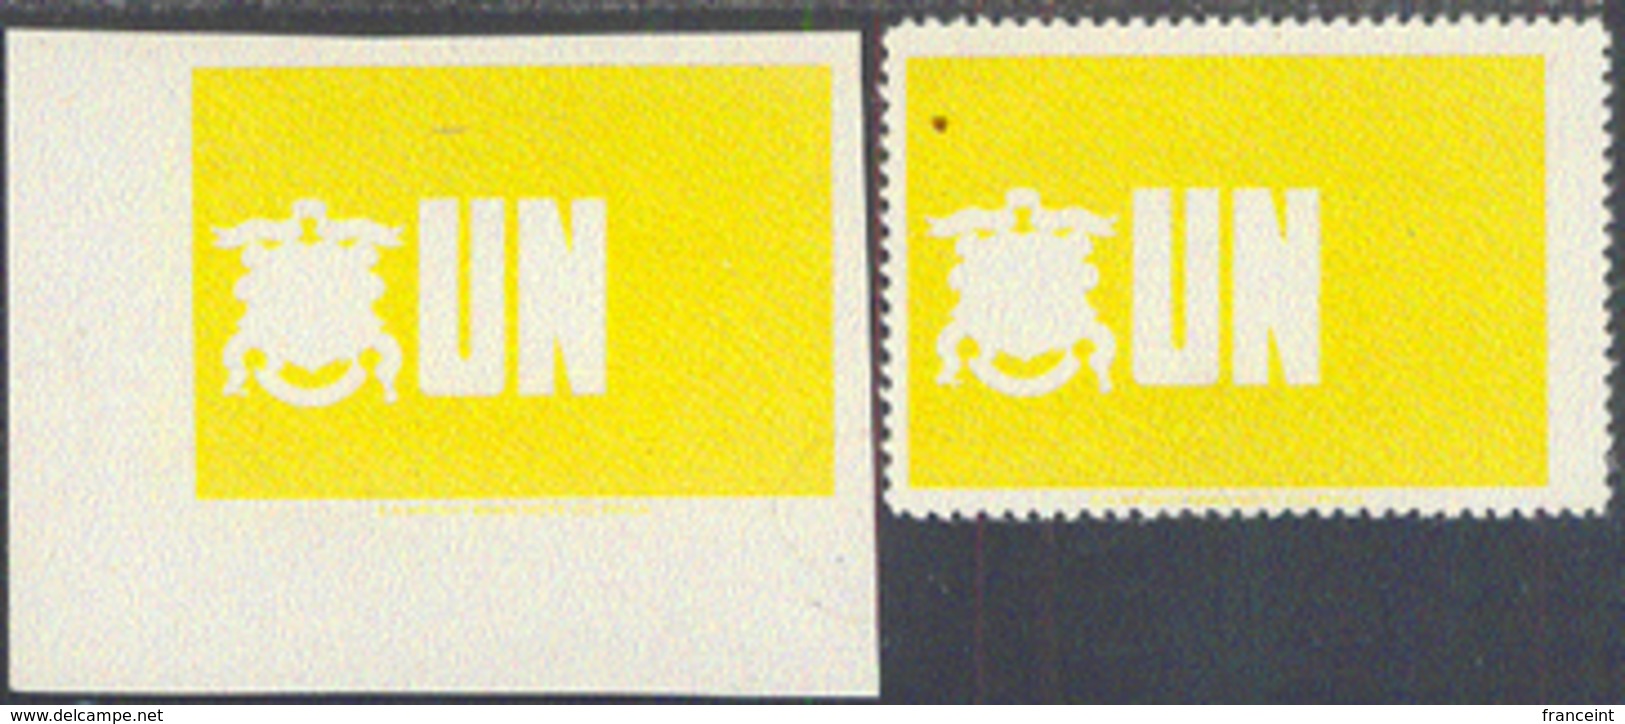 LIBERIA (1953) UN Emblem. Perforate And Imperforate Printed In Yellow. Scott No 340, Yvert No 317. - Liberia